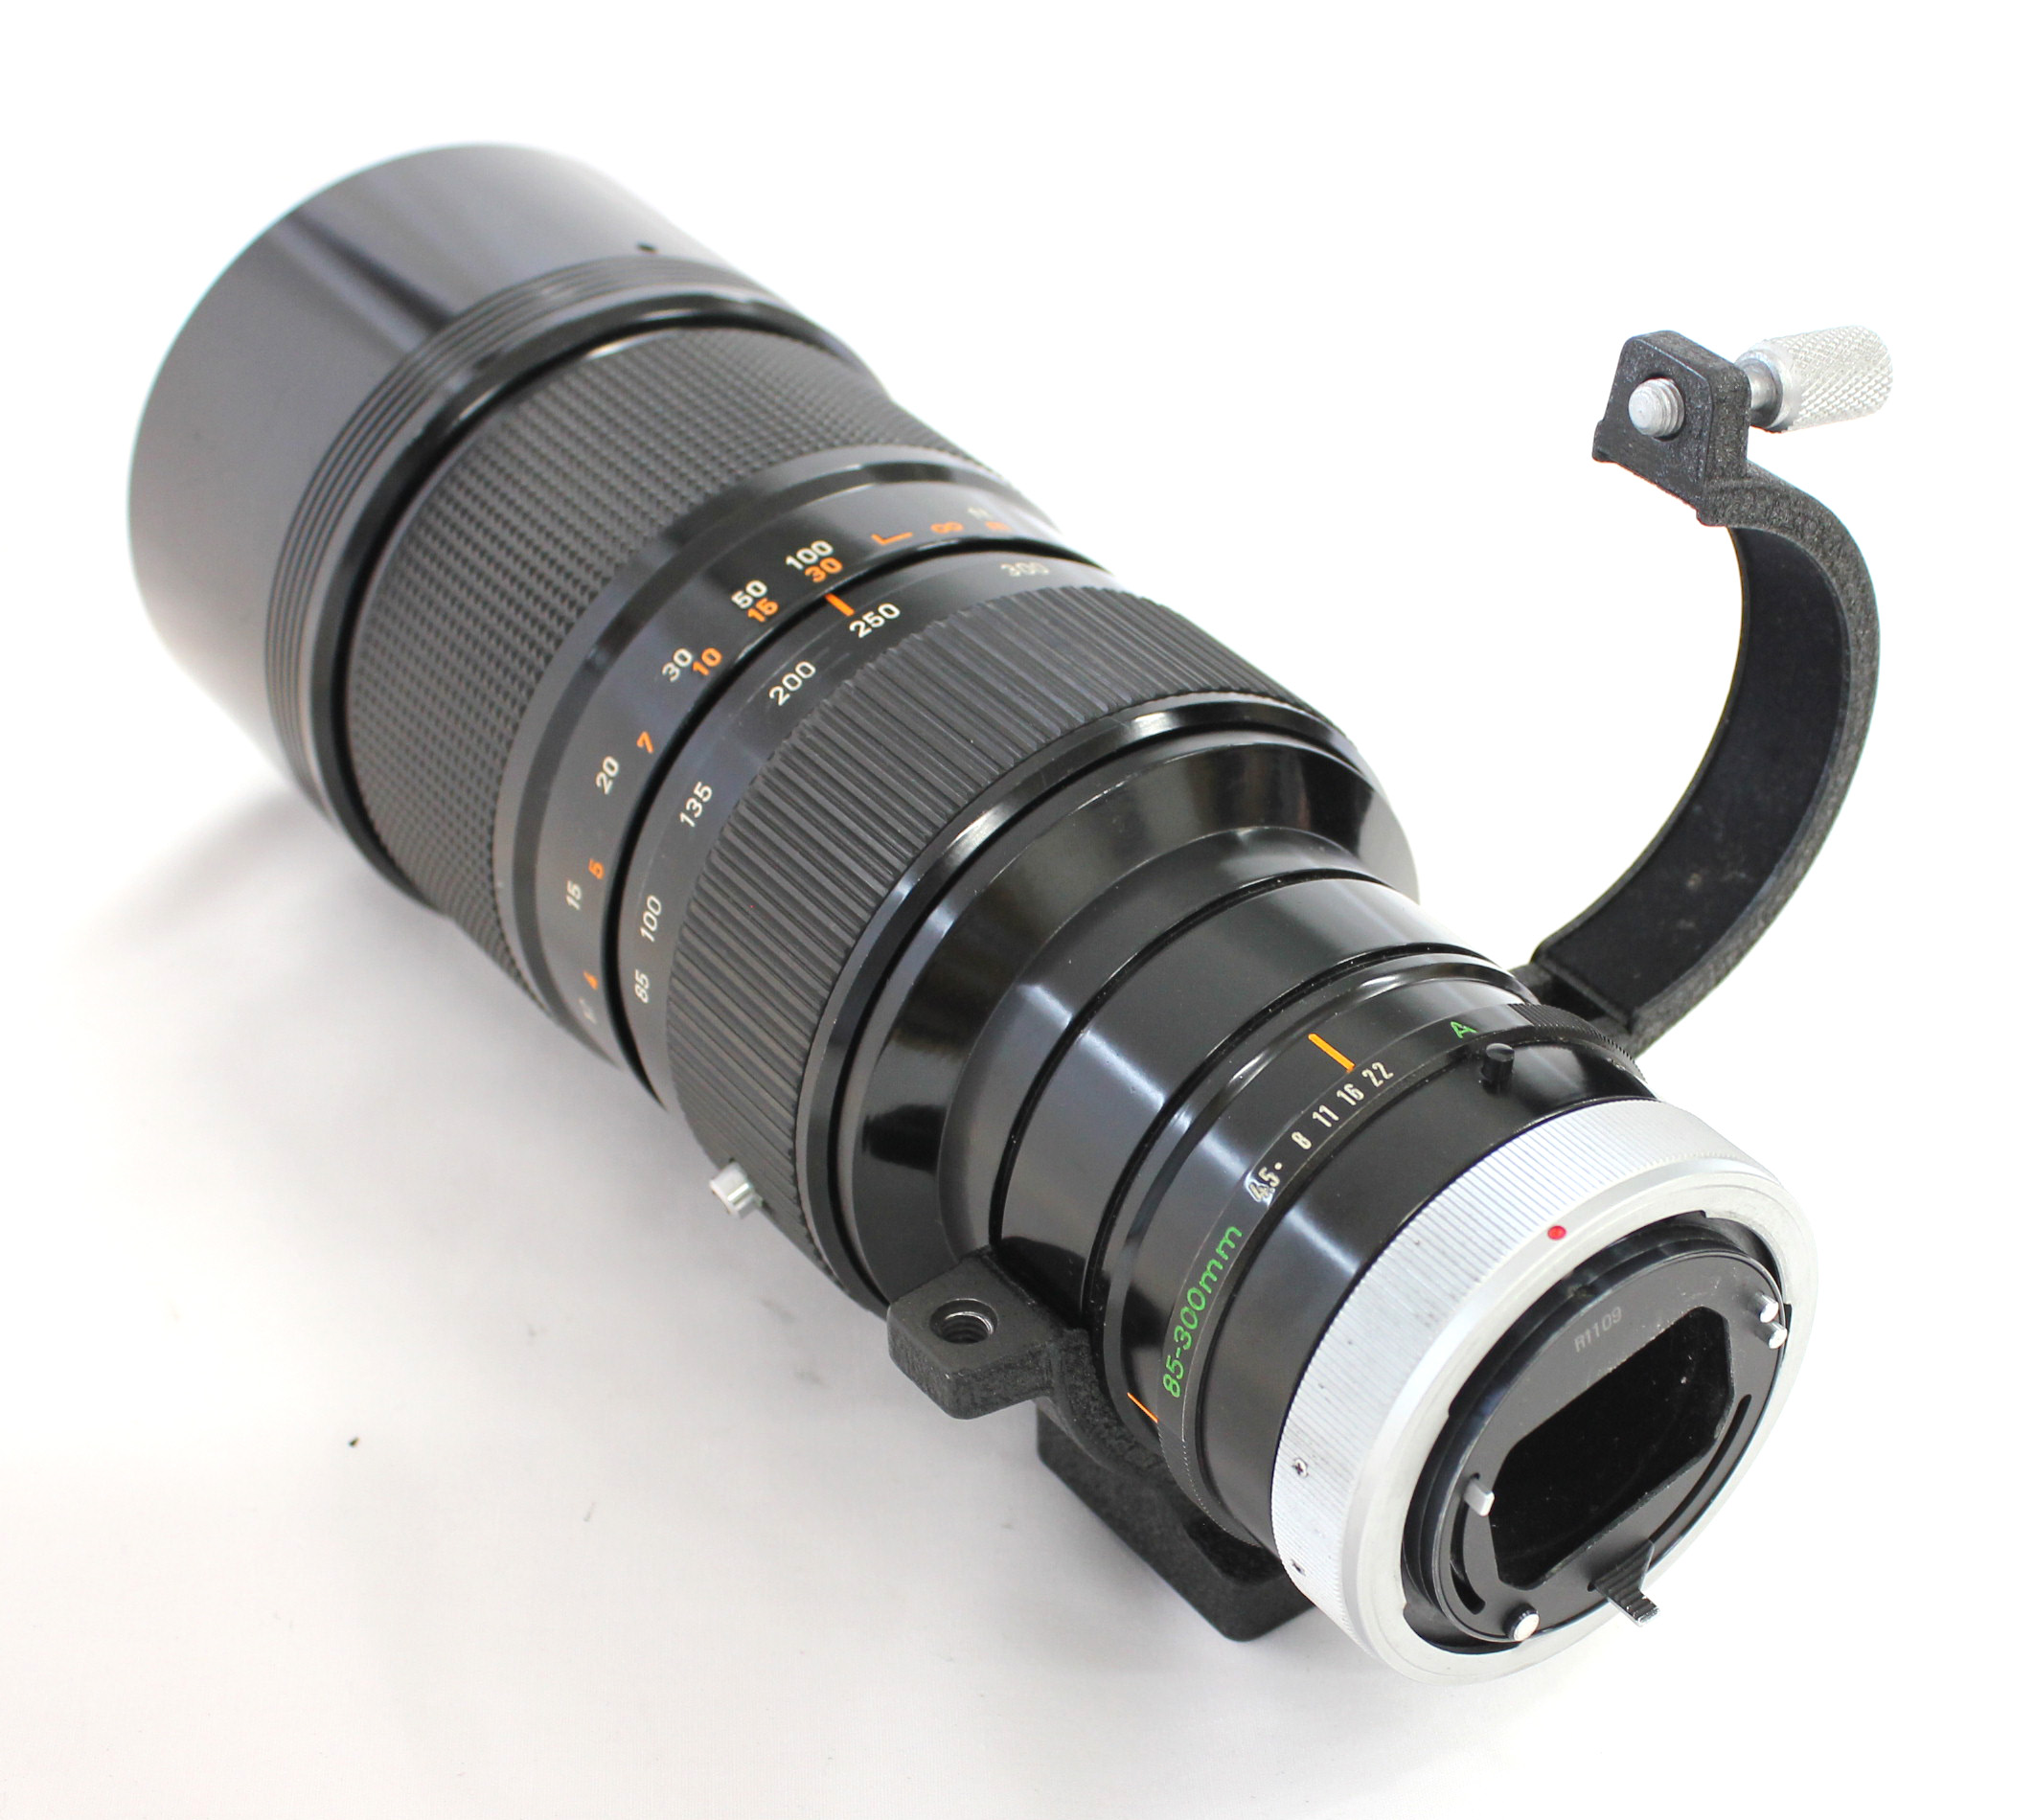 Canon FD 85-300mm F/4 S.S.C. ssc MF Telephoto Lens from Japan